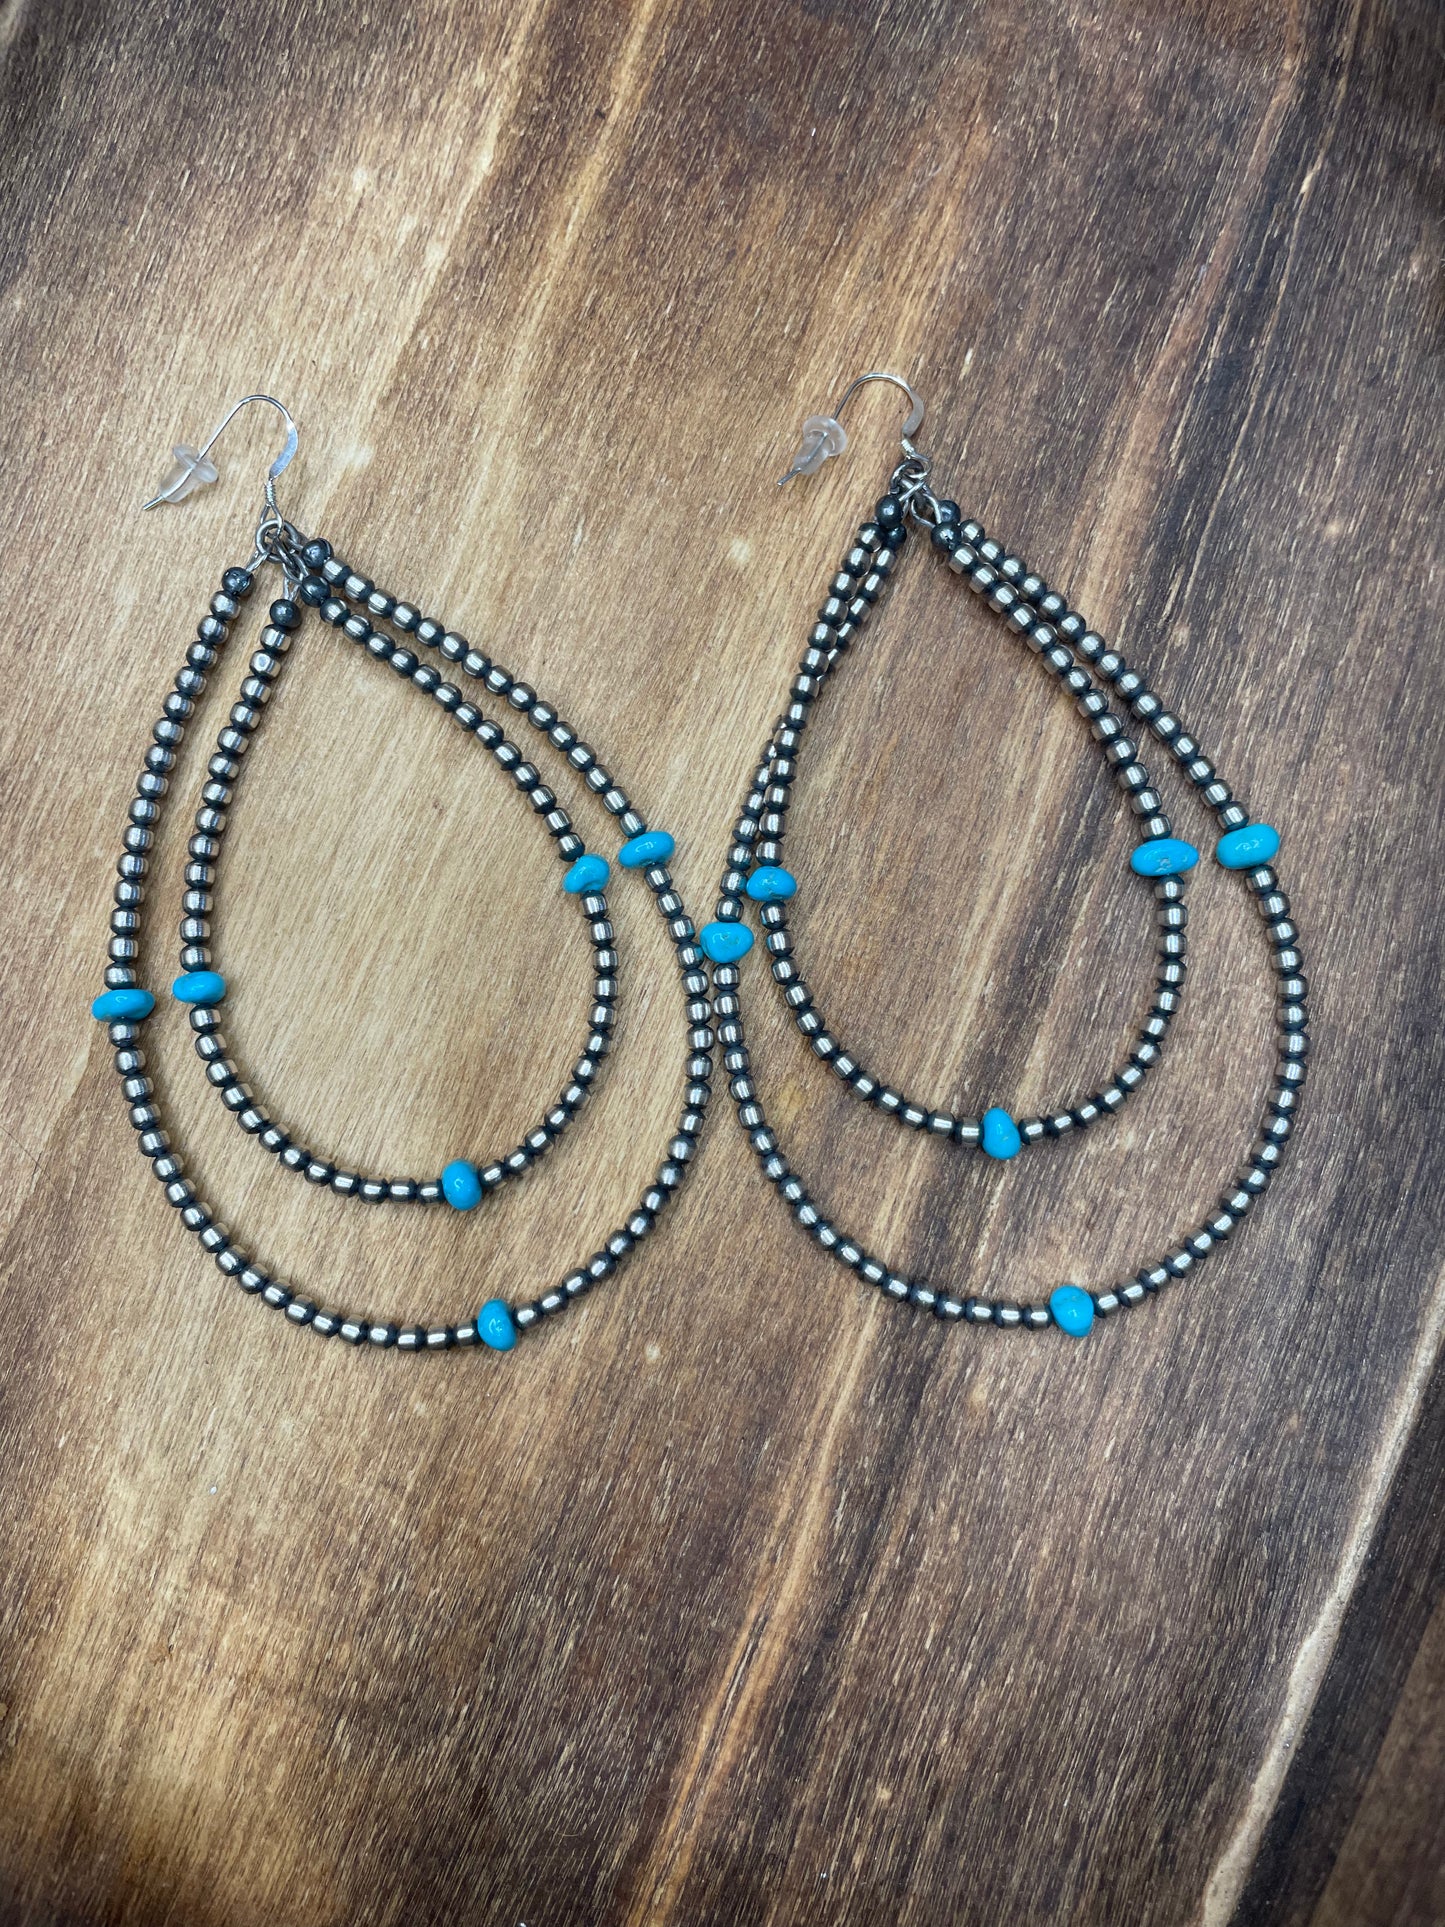 3mm double strand teardrops 4” + Turquoise